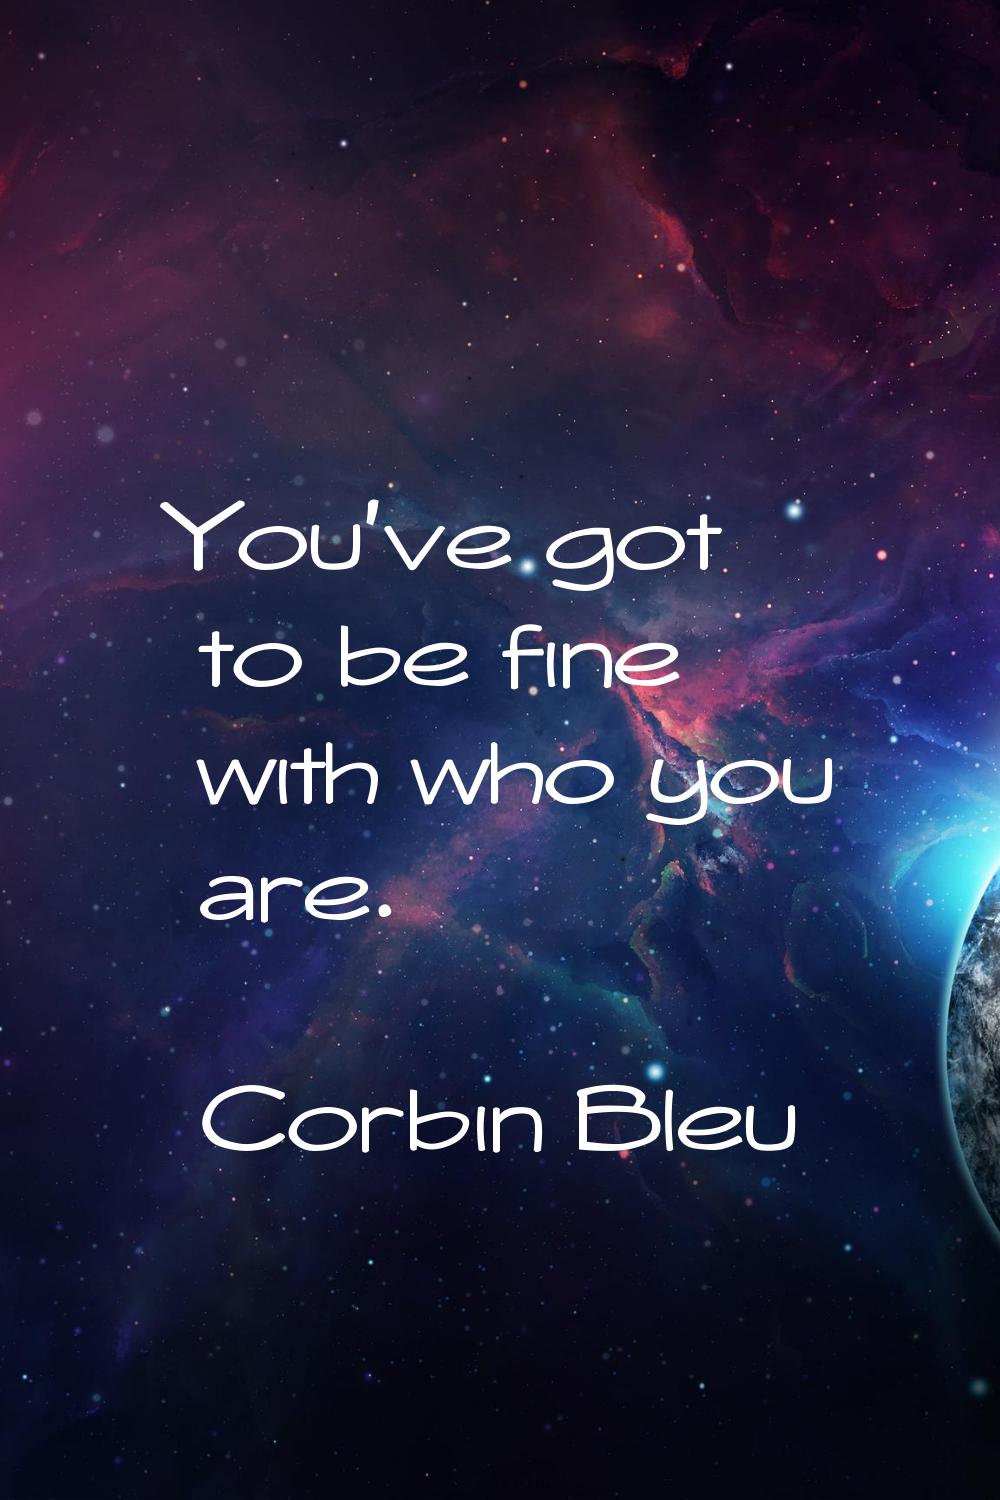 You've got to be fine with who you are.